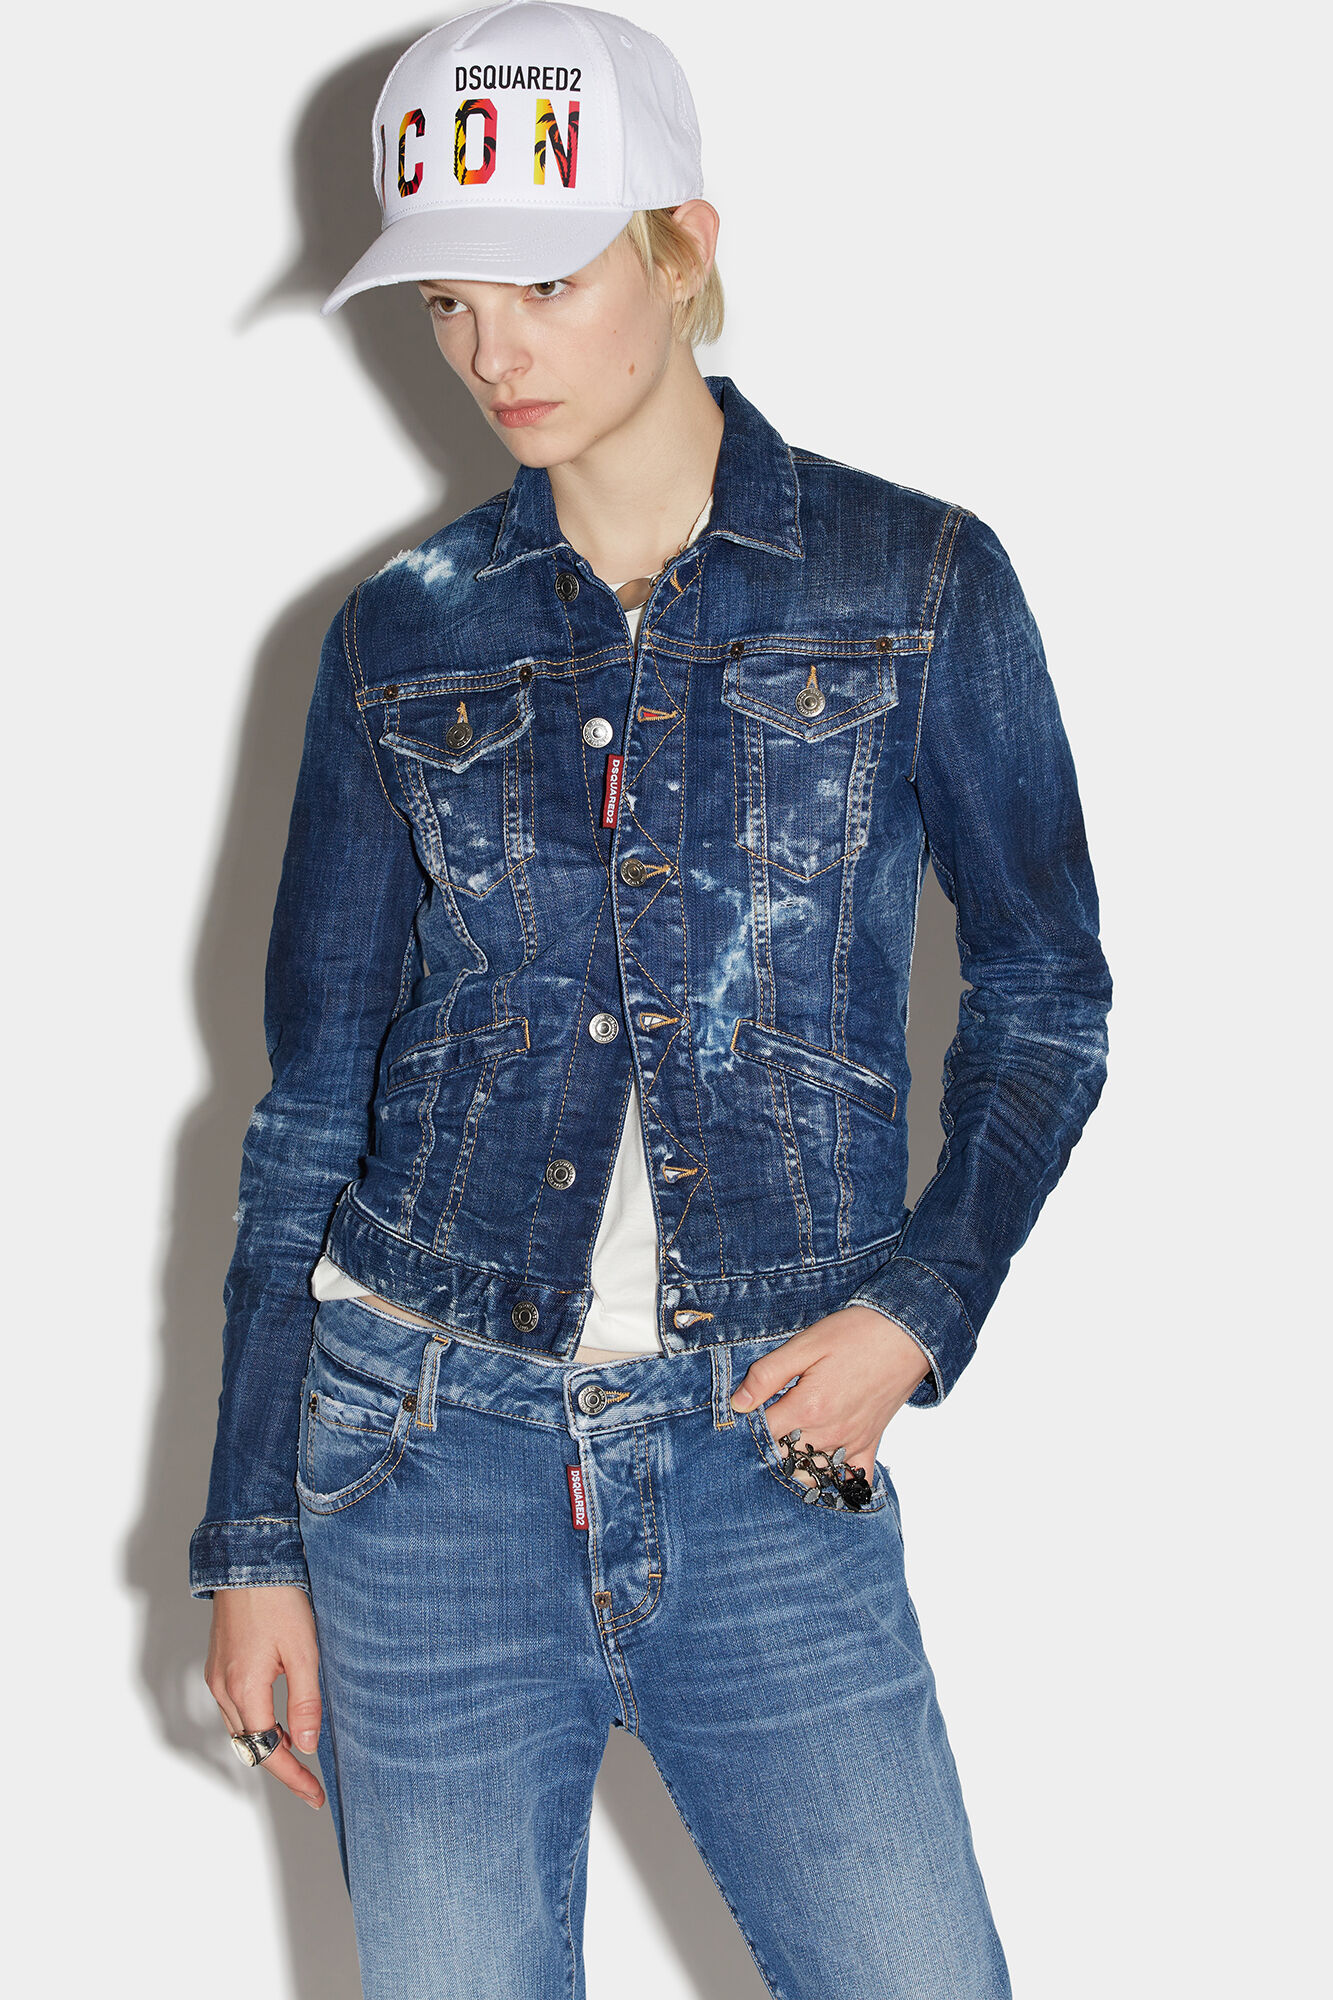 Boys Denim Jacket Style Three Piece Set with Blue Color Jeans